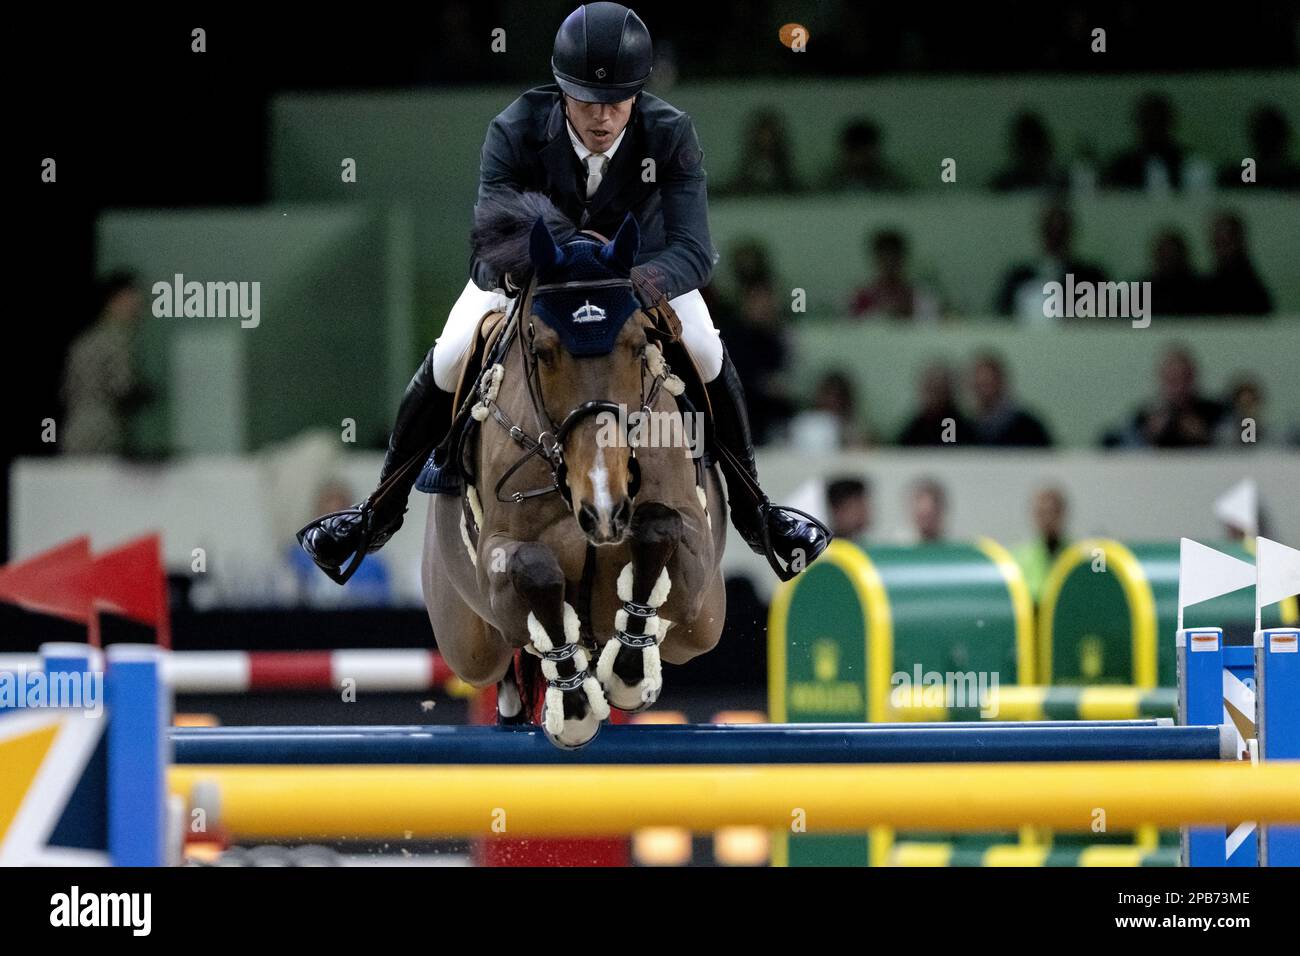 DEN BOSCH - Harrie Smolders (NED) on Monaco NOP in action during the World Cup show jumping, during The Dutch Masters Indoor Brabant Horse Show. ANP SANDER KONING netherlands out - belgium out Stock Photo